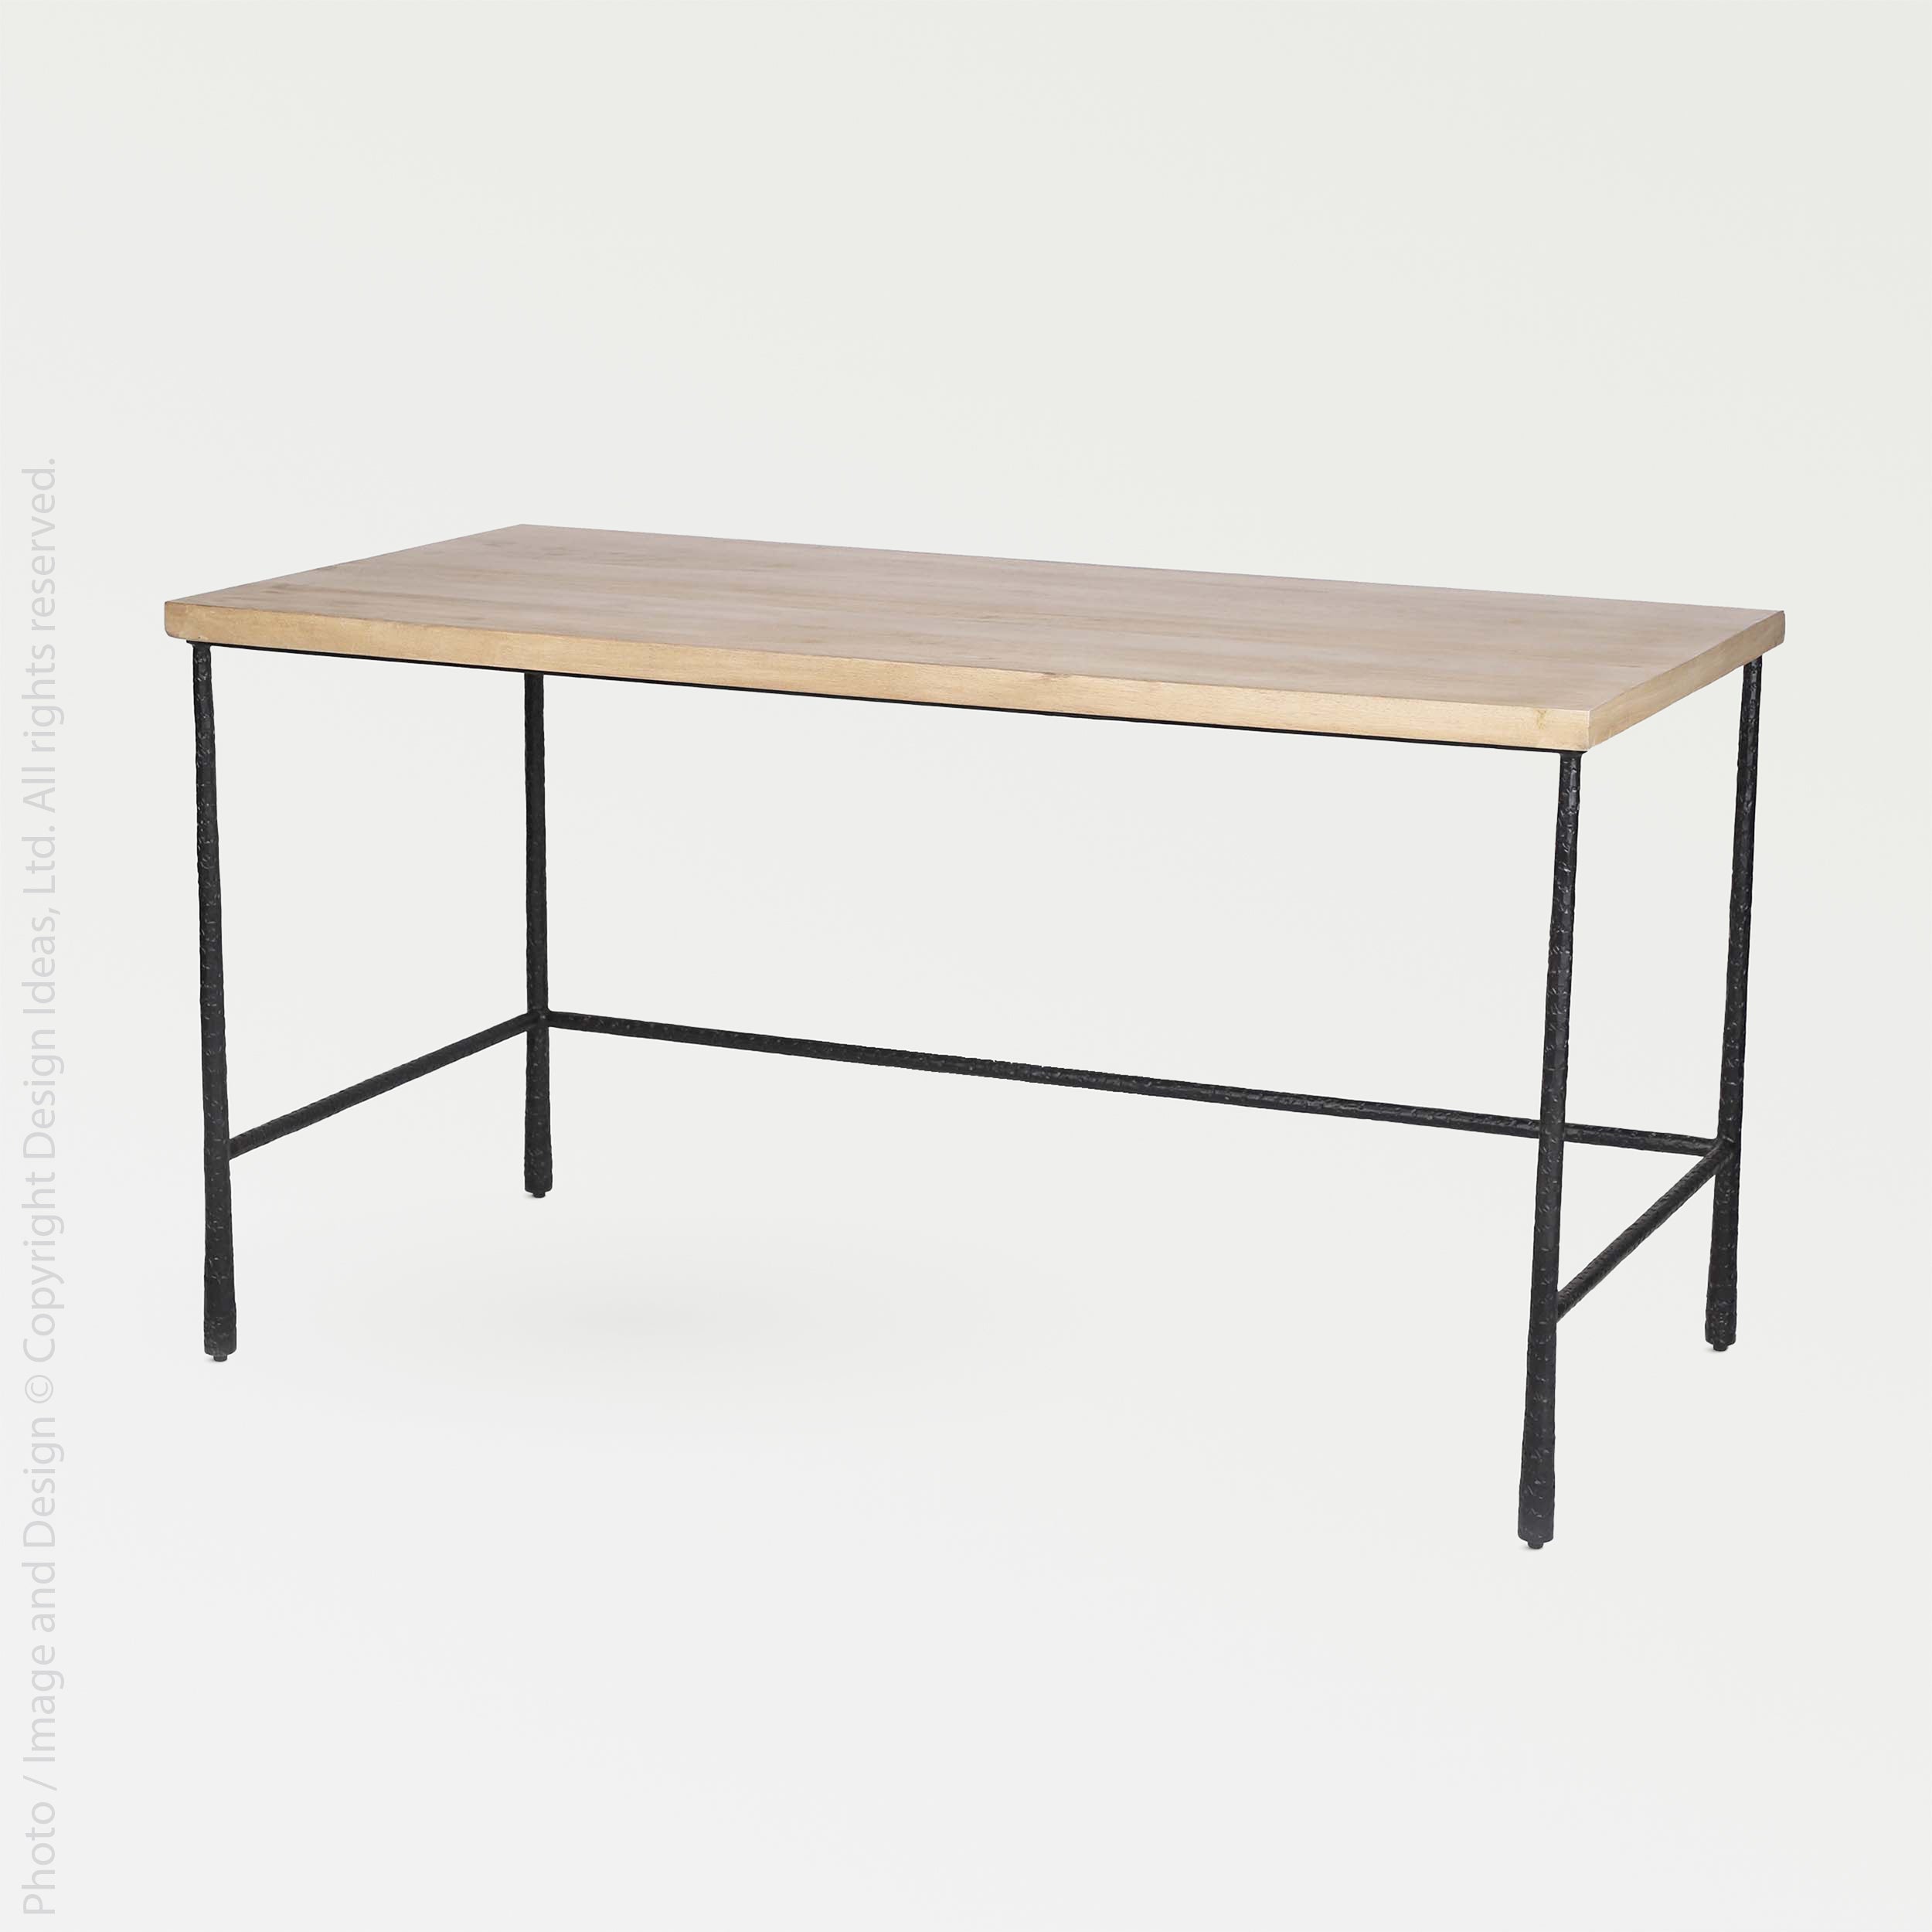 Valea™ desk - Natural | Image 1 | Premium Table from the Valea collection | made with Mango Wood for long lasting use | texxture